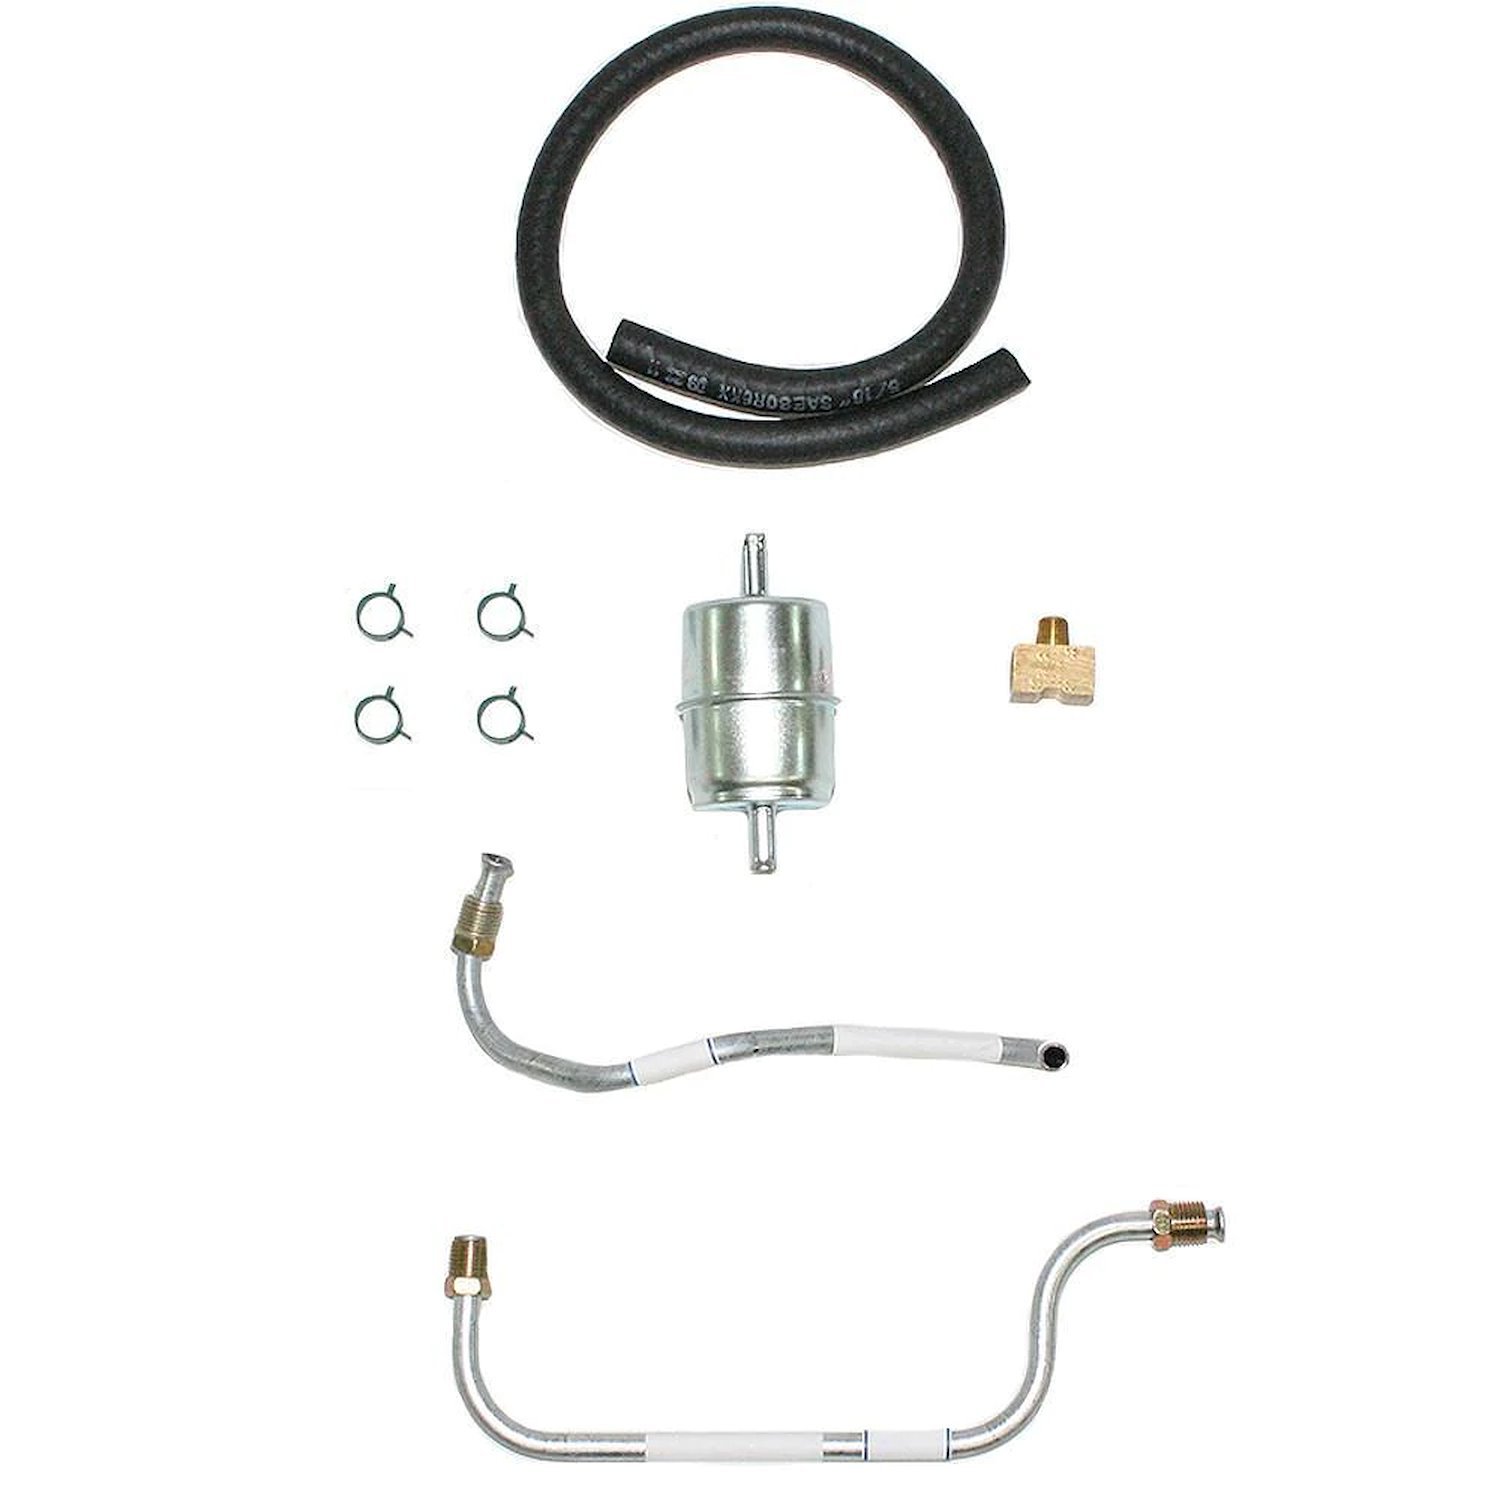 Fuel Line Kit, Fuel Pump to Carburetor for 1965 Oldsmobile CUtlass, F85, 442 with 400 Engine/4-bbl [Stainless Steel]